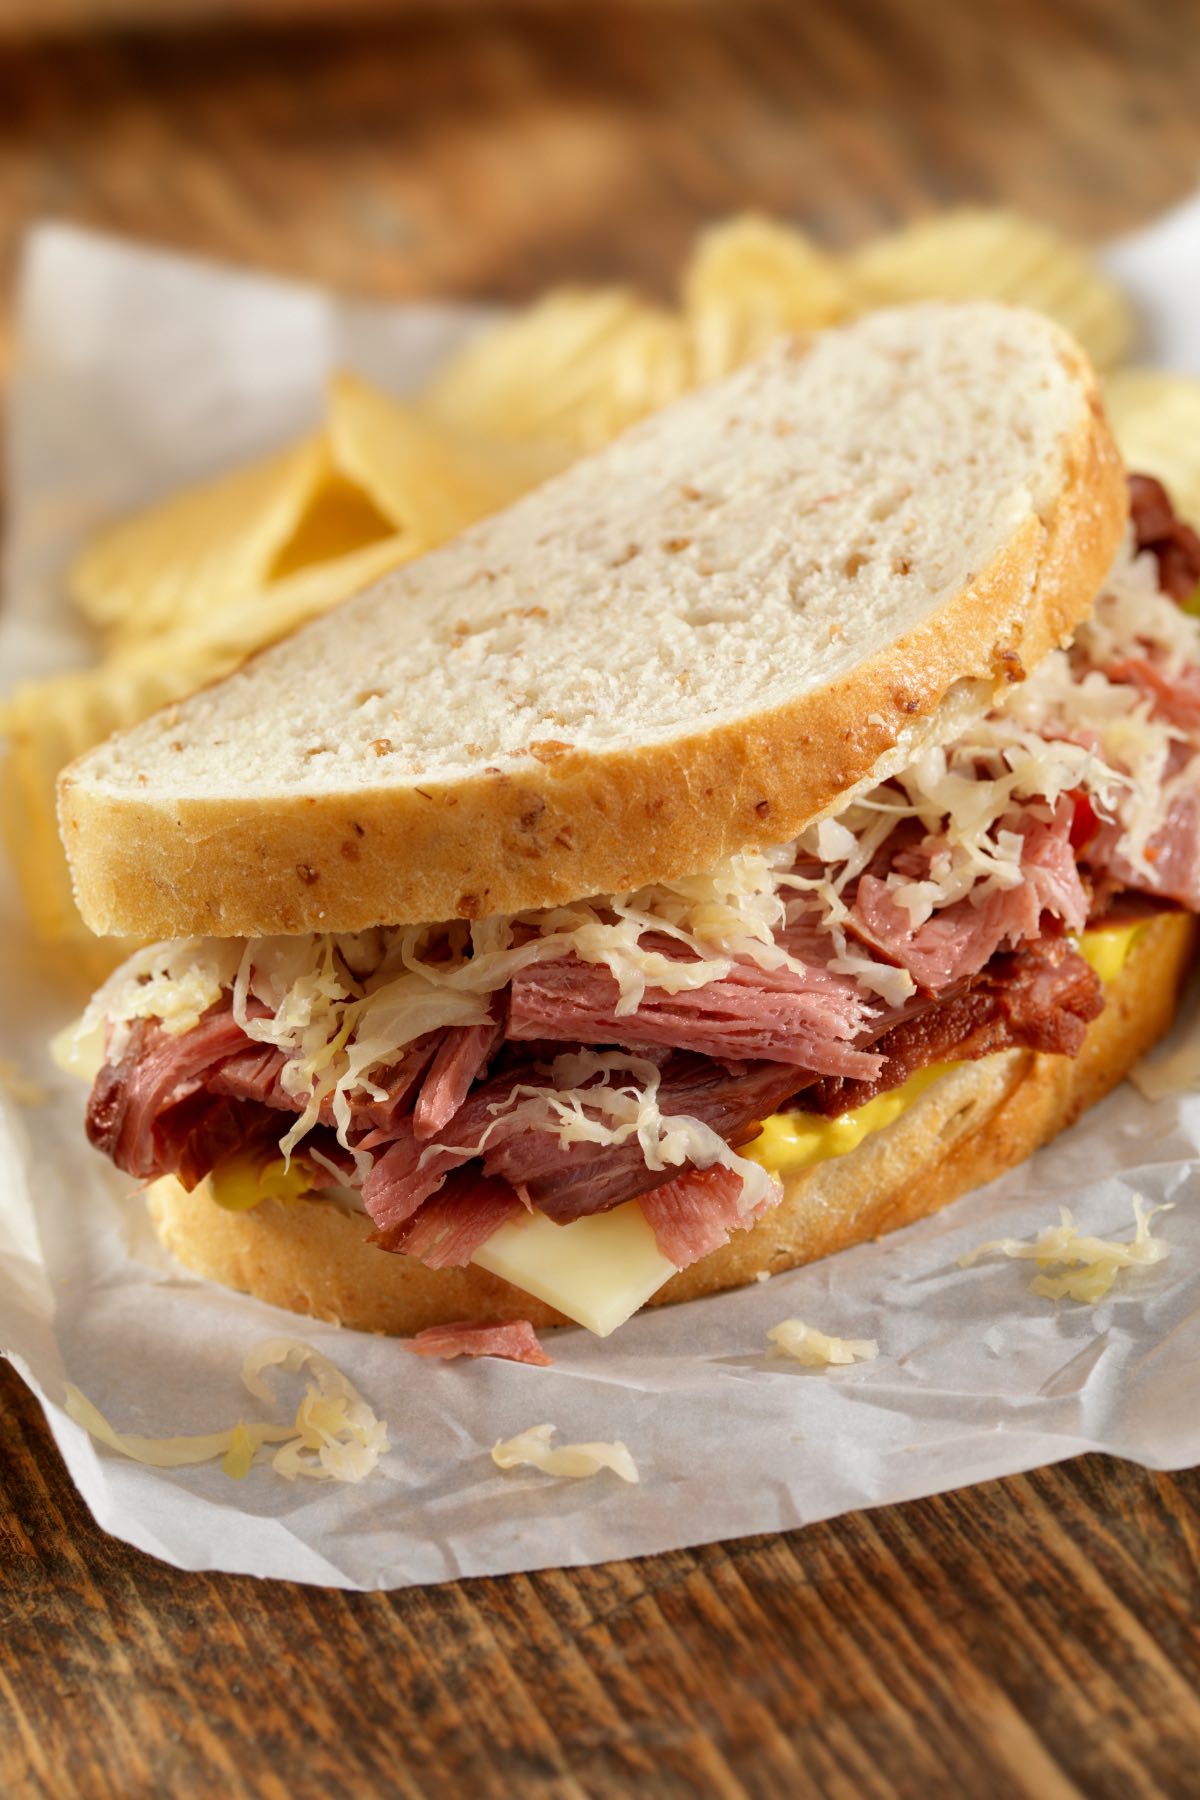 The ultimate Pastrami Sandwich piled high with thinly sliced pastrami, Swiss cheese, and coleslaw. These Artisan sandwiches are perfect for a hearty meal. Serve hot or cold with your favorite fries and veggies!